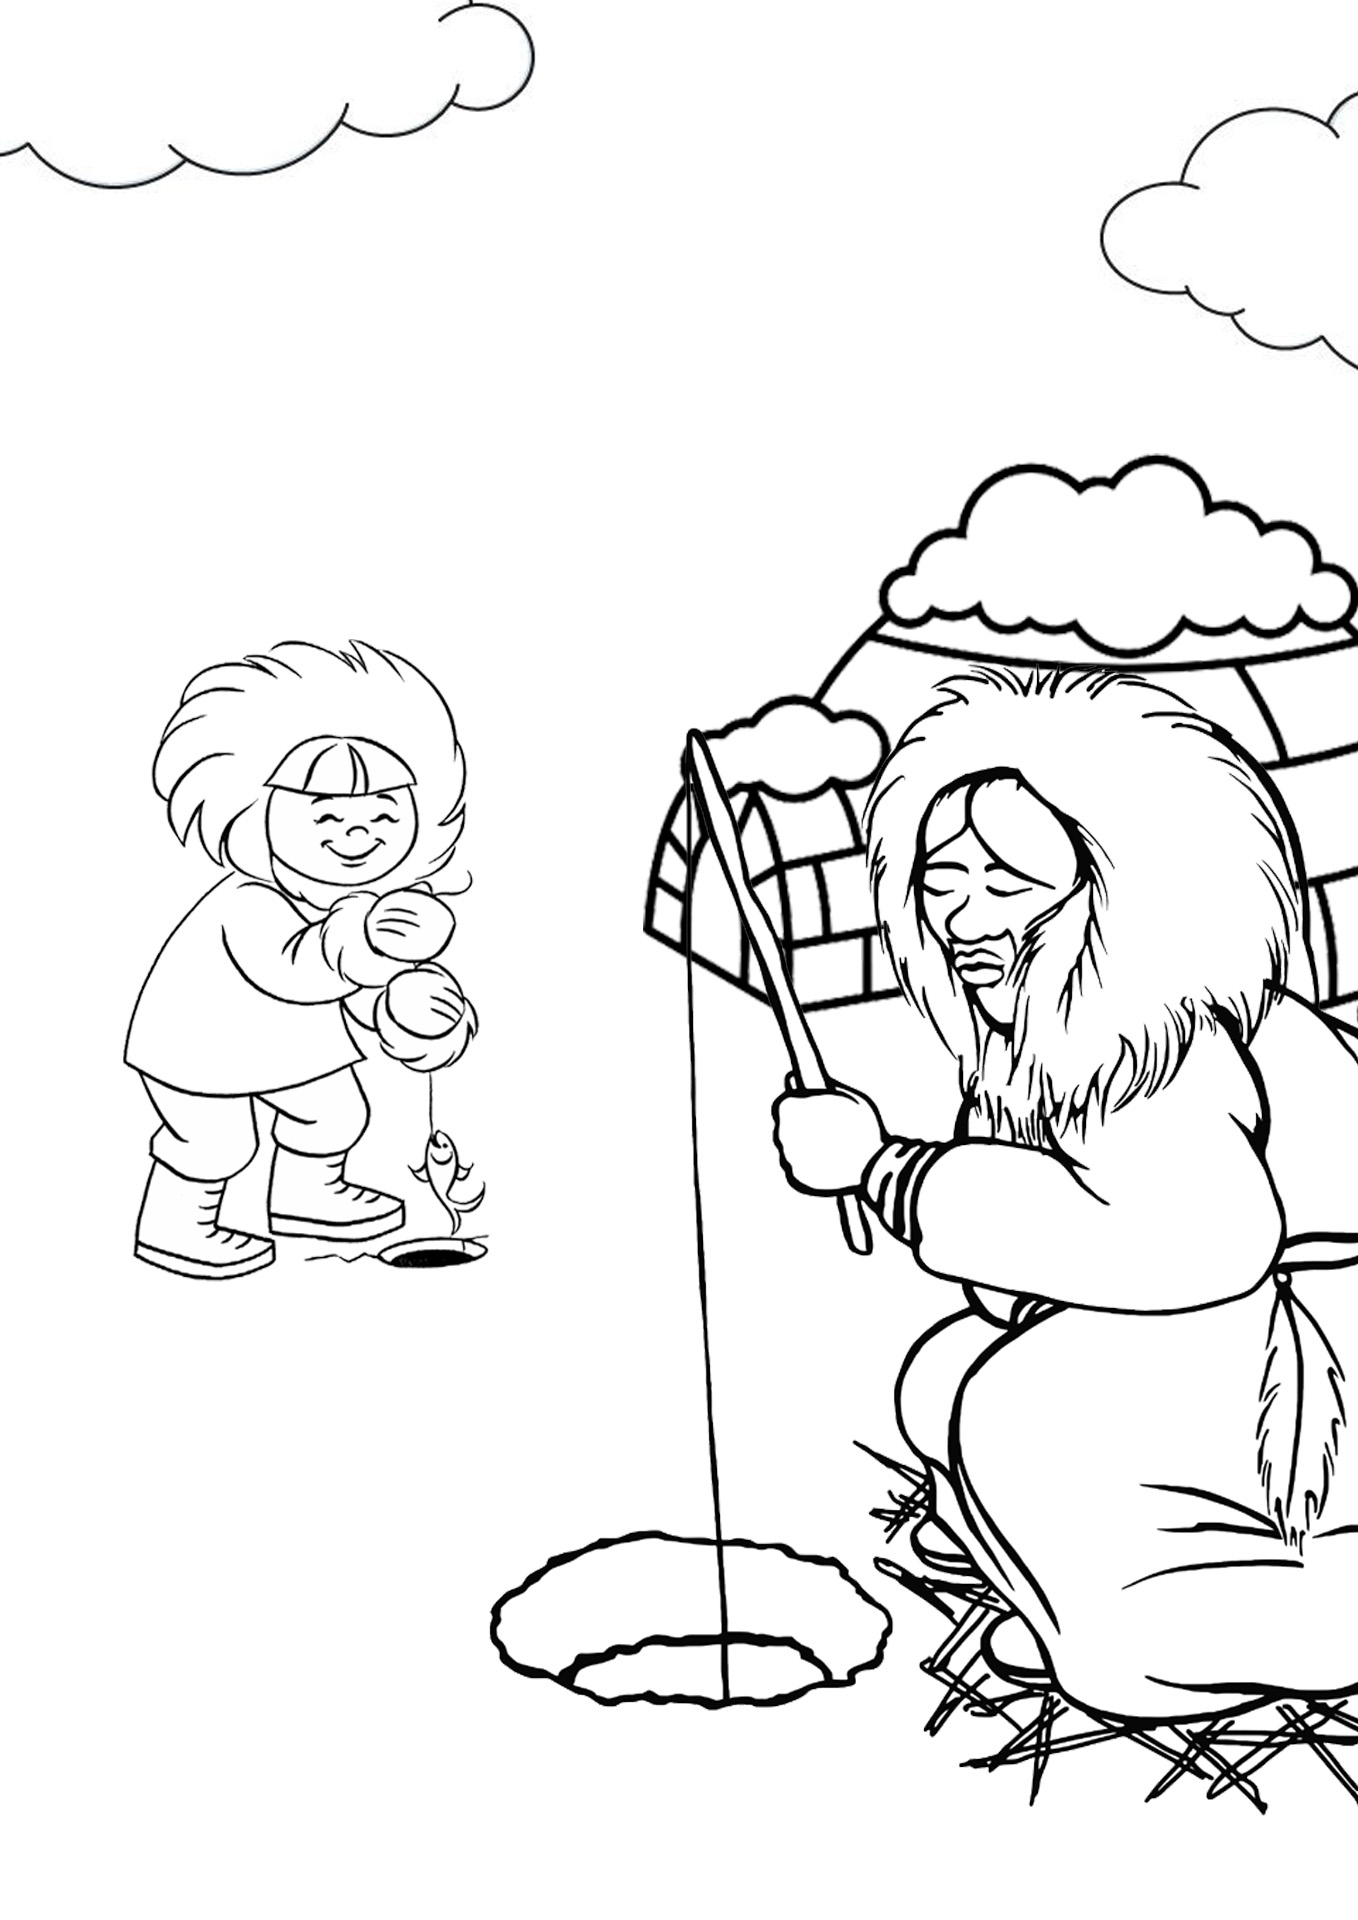 Inuit Coloring Pages Image